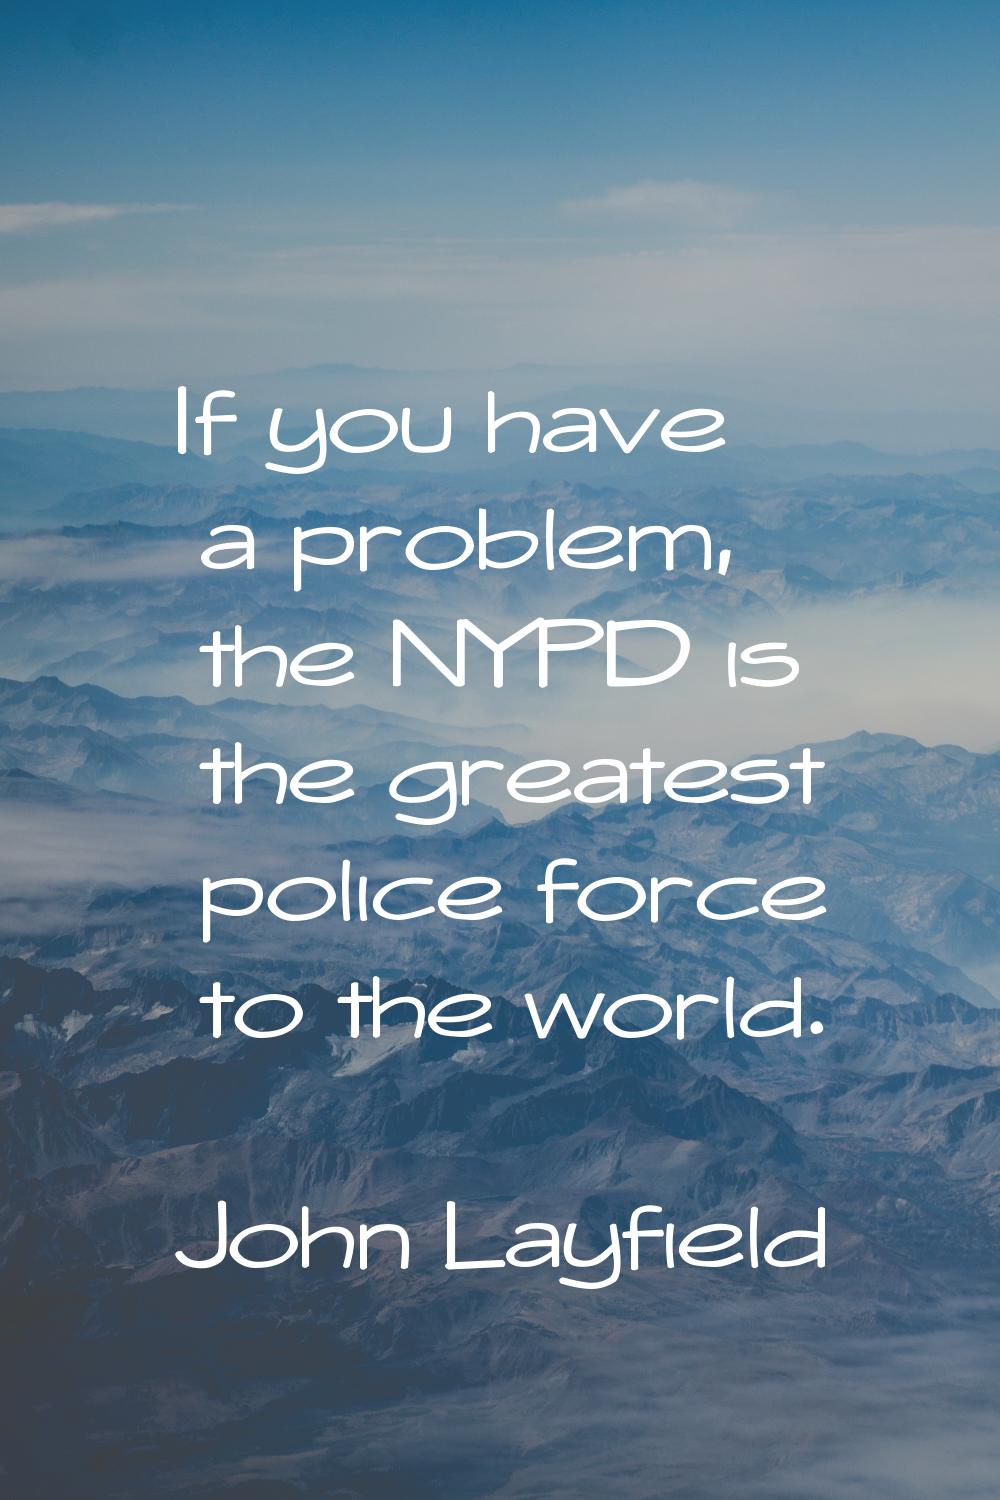 If you have a problem, the NYPD is the greatest police force to the world.